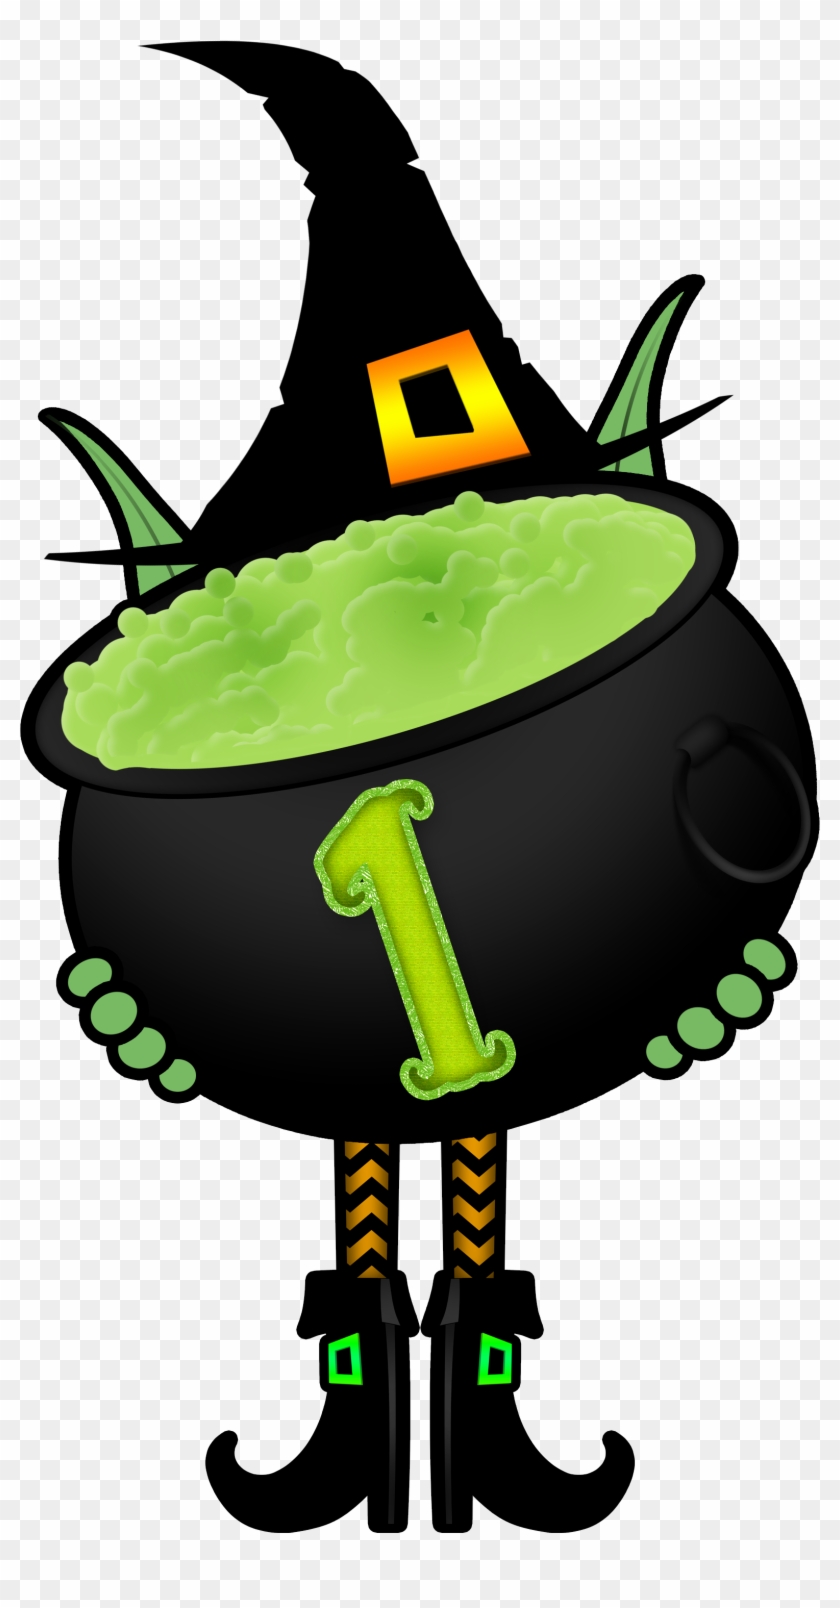 Full Size Of Halloween Cauldrons Clipart Or Witch Cauldron - Full Size Of Halloween Cauldrons Clipart Or Witch Cauldron #1592965